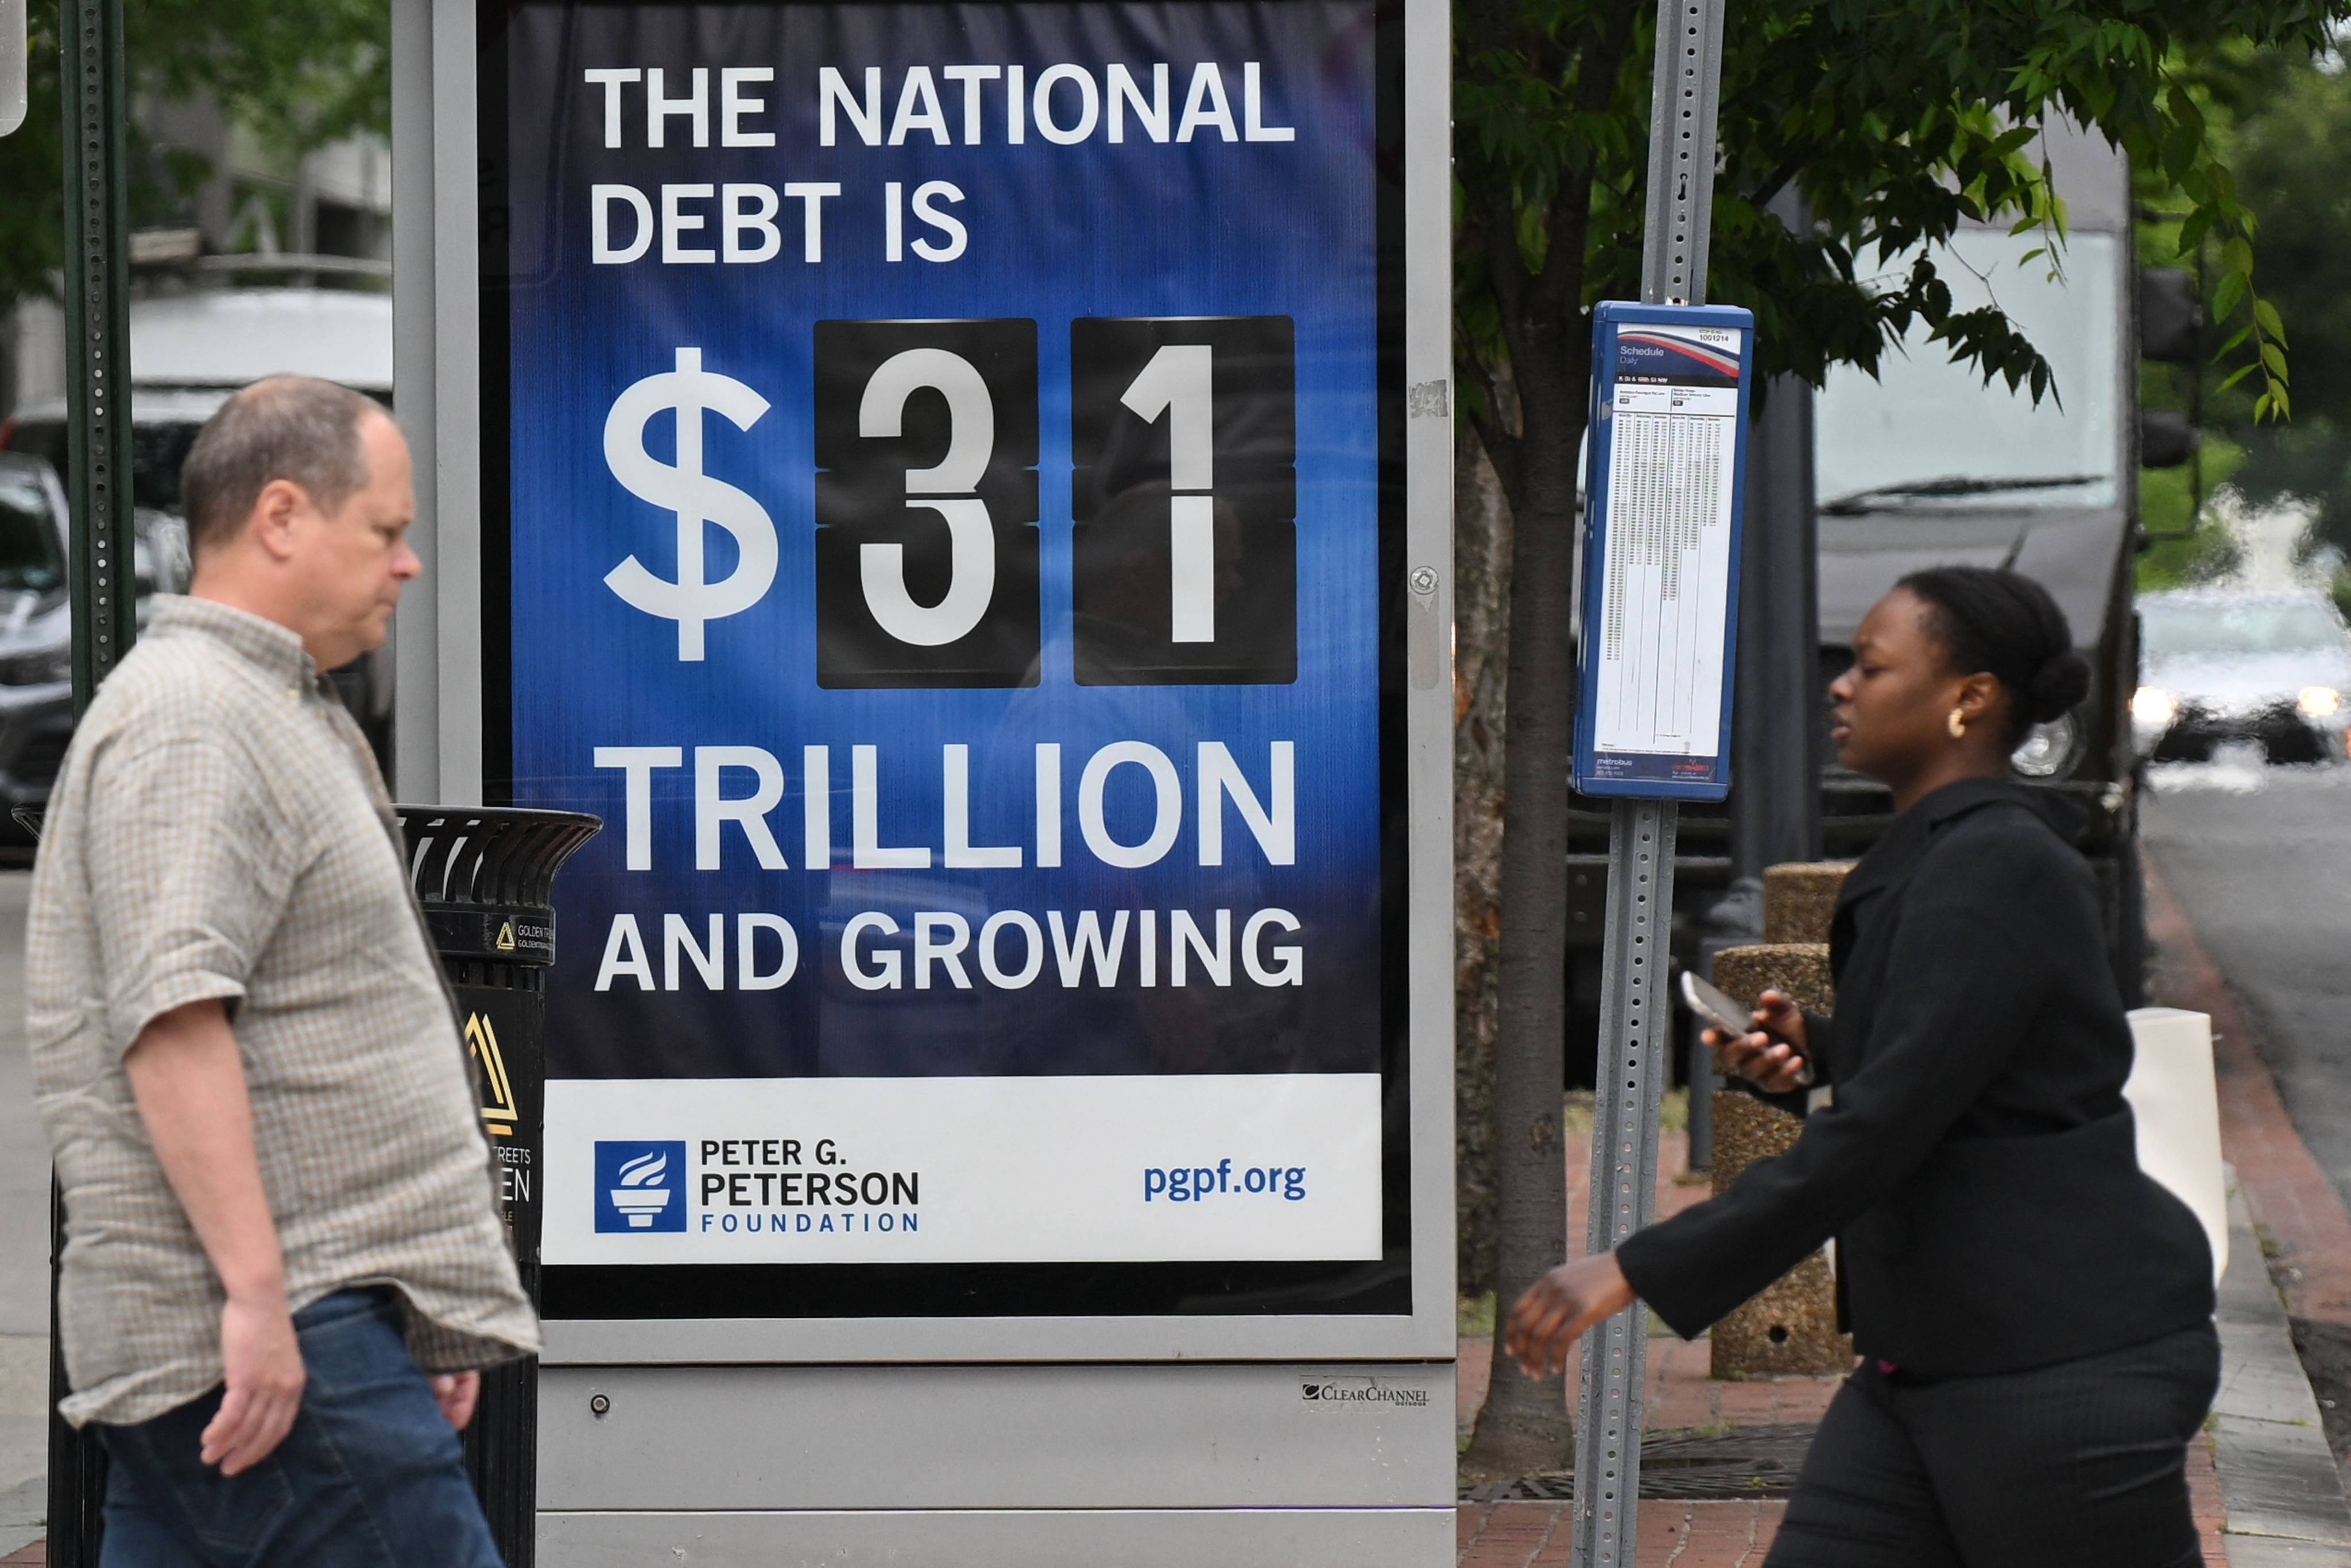 Pedestrians walk past a billboard showing the national debt in Washington on May 19. Photo: AFP